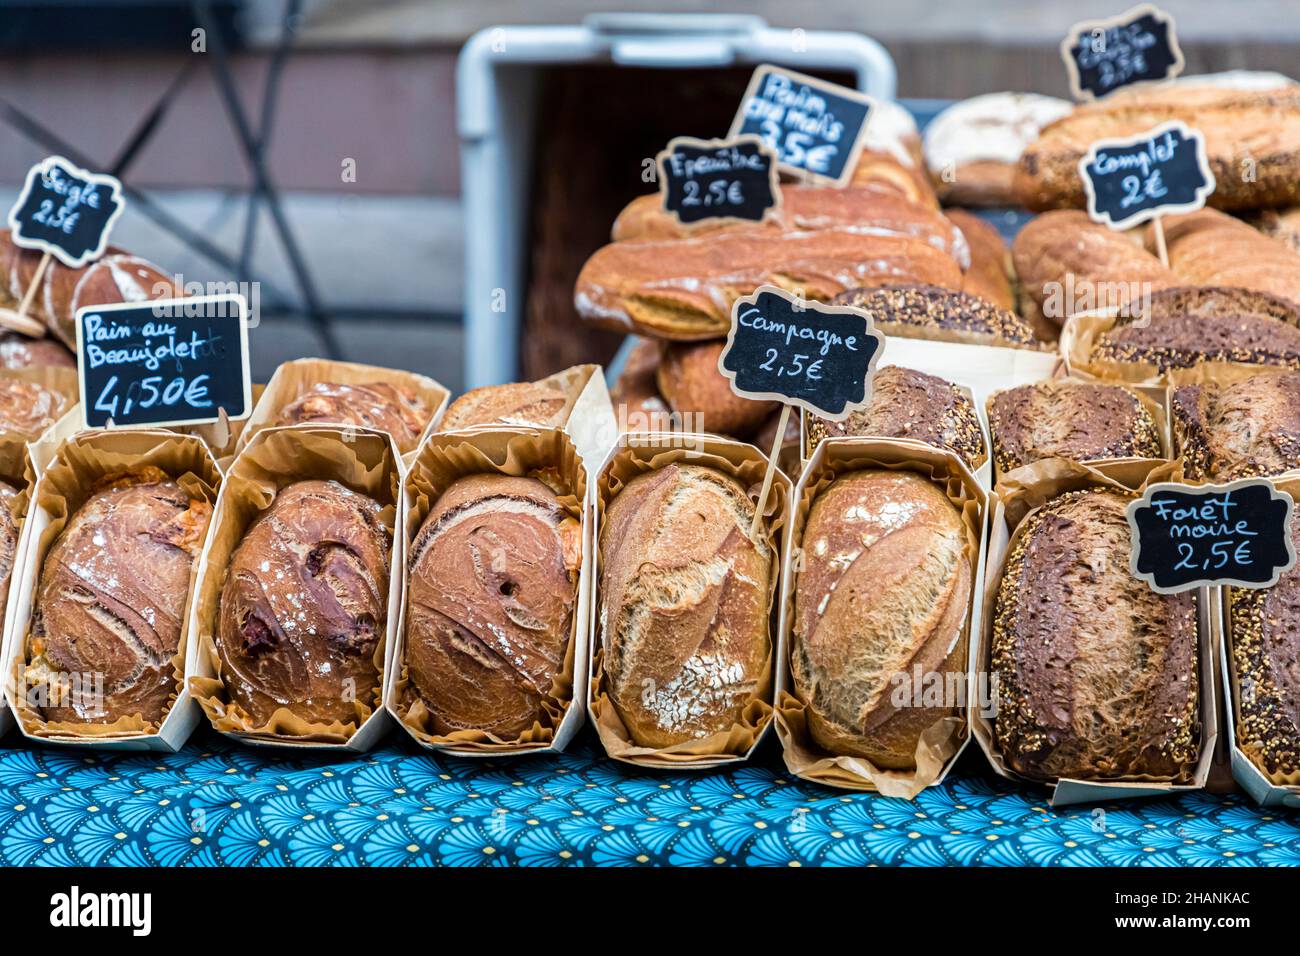 Weekly market in Draguignan, France Stock Photo